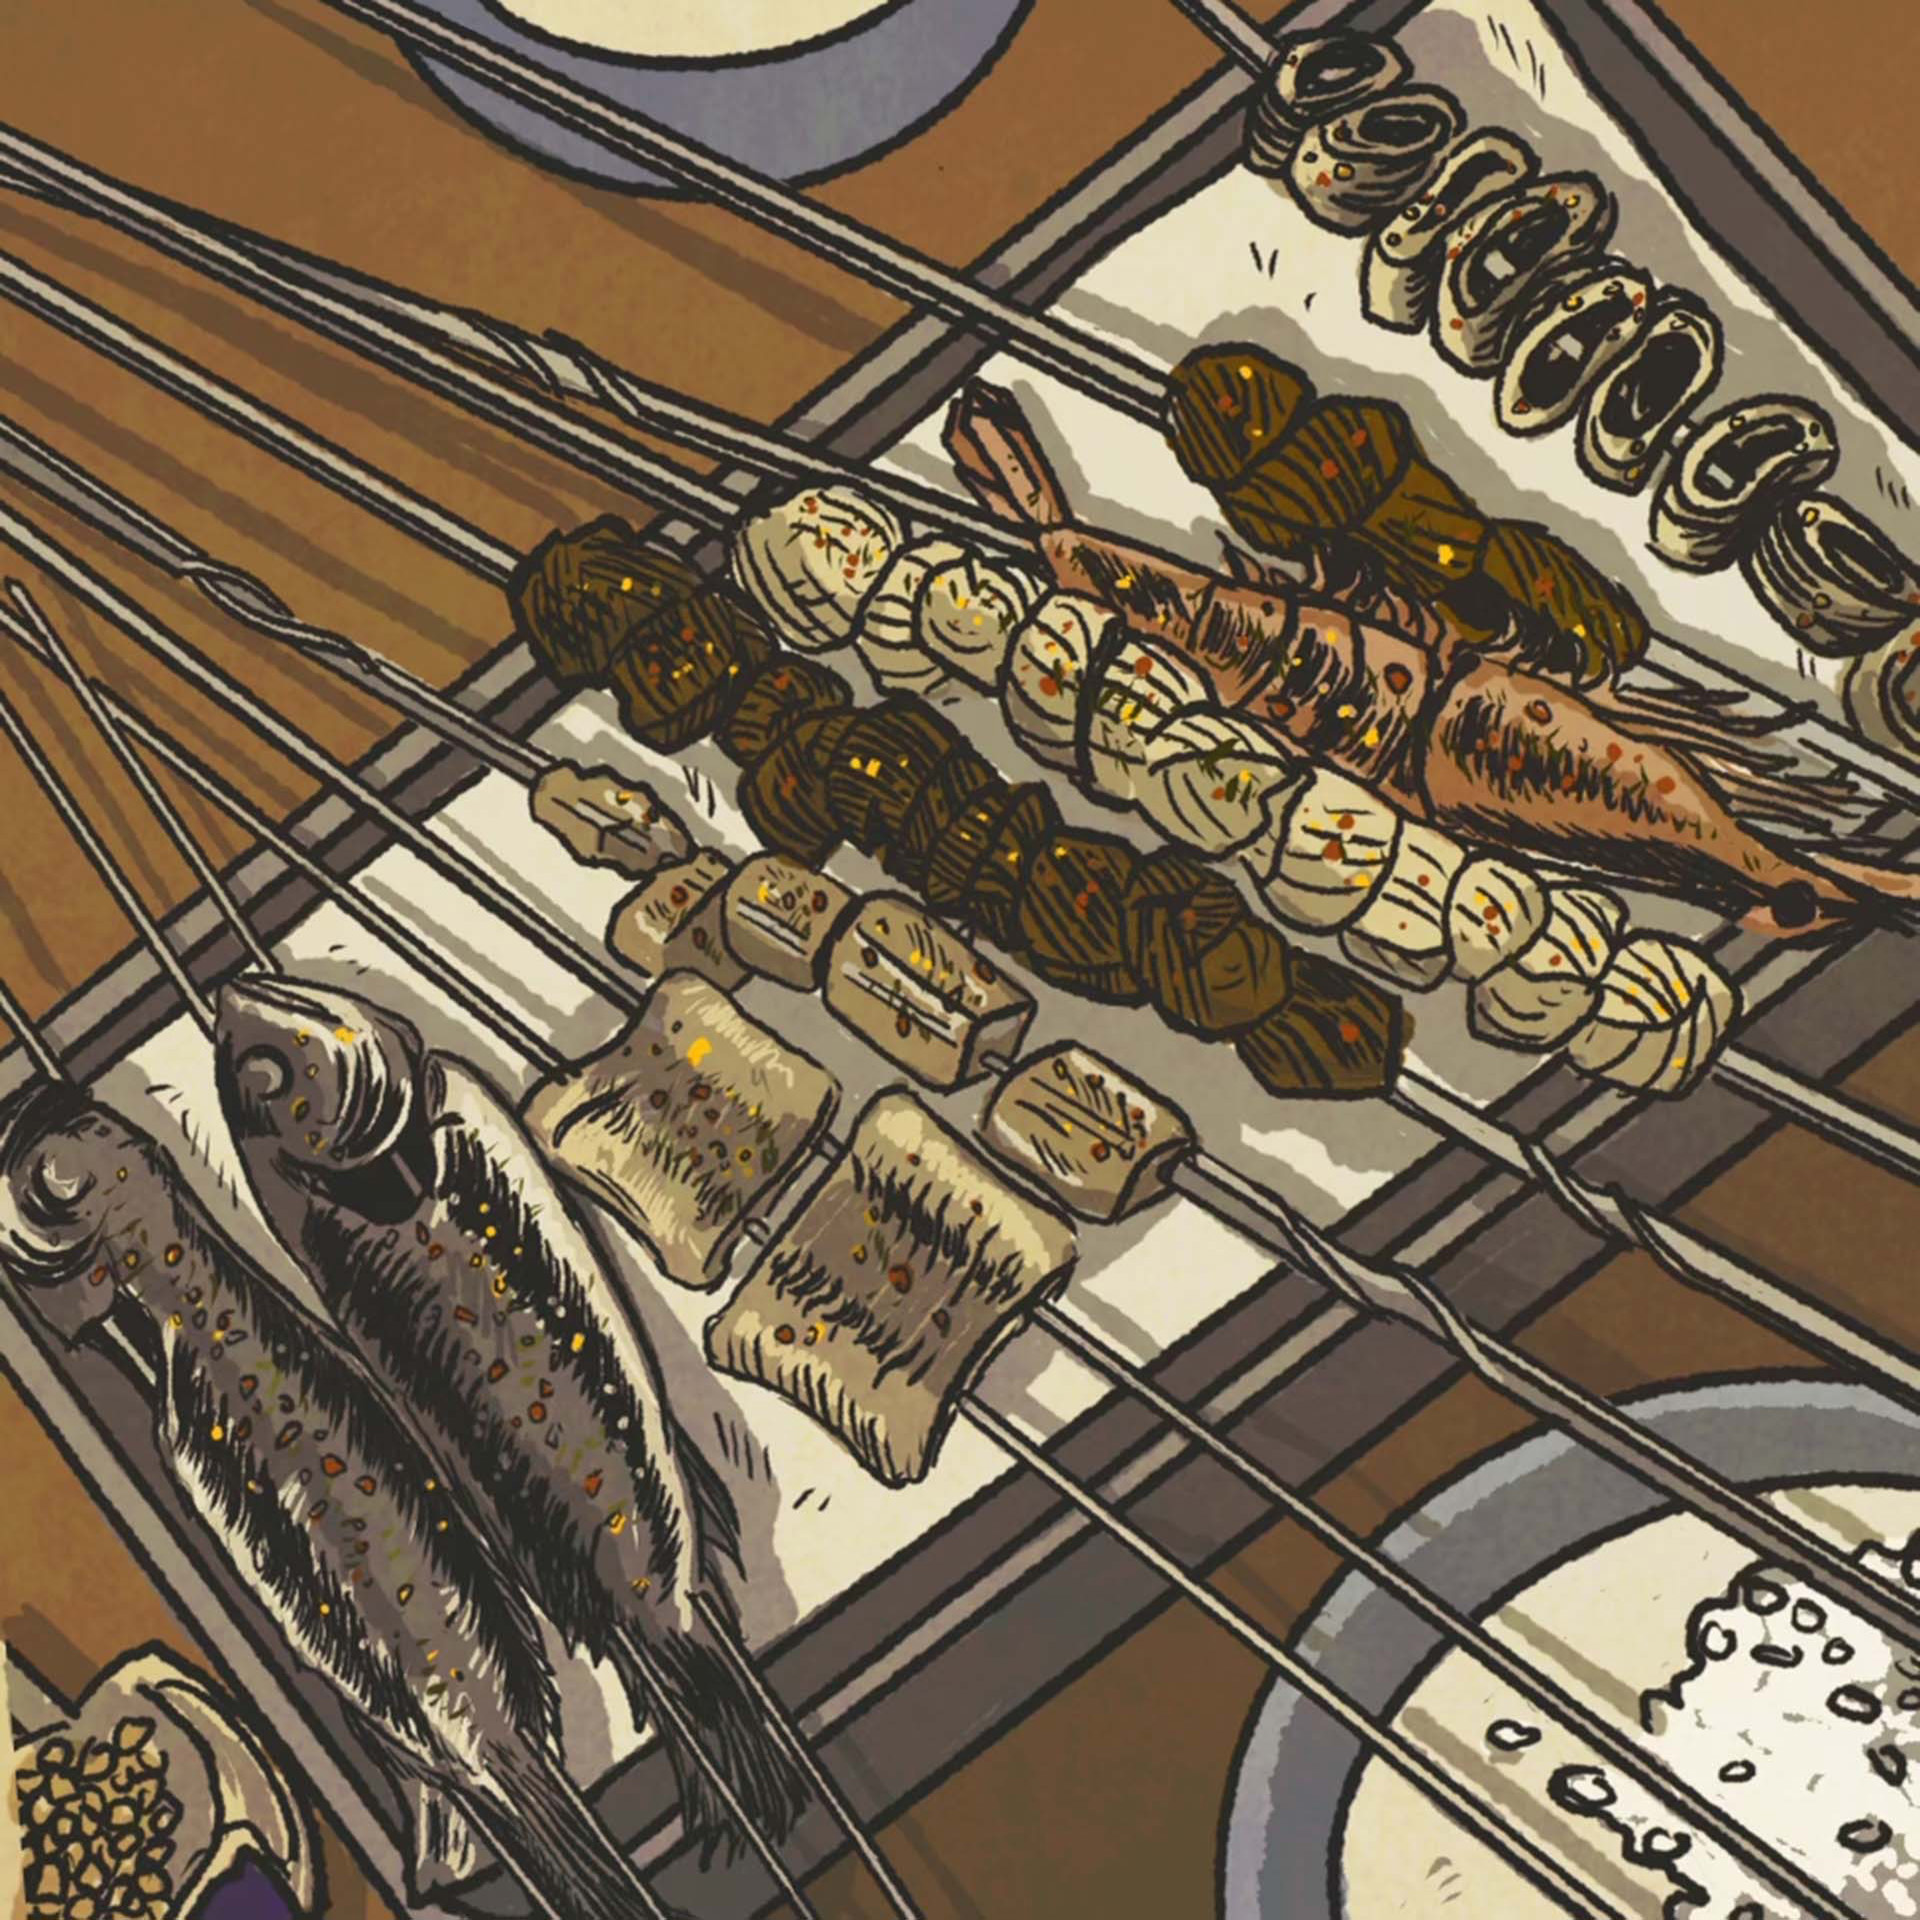 An illustration of a tray of Chinese grilled meat skewers, including kebab-style lamb and beef, pork intestines, whole shrimp and whole fish.